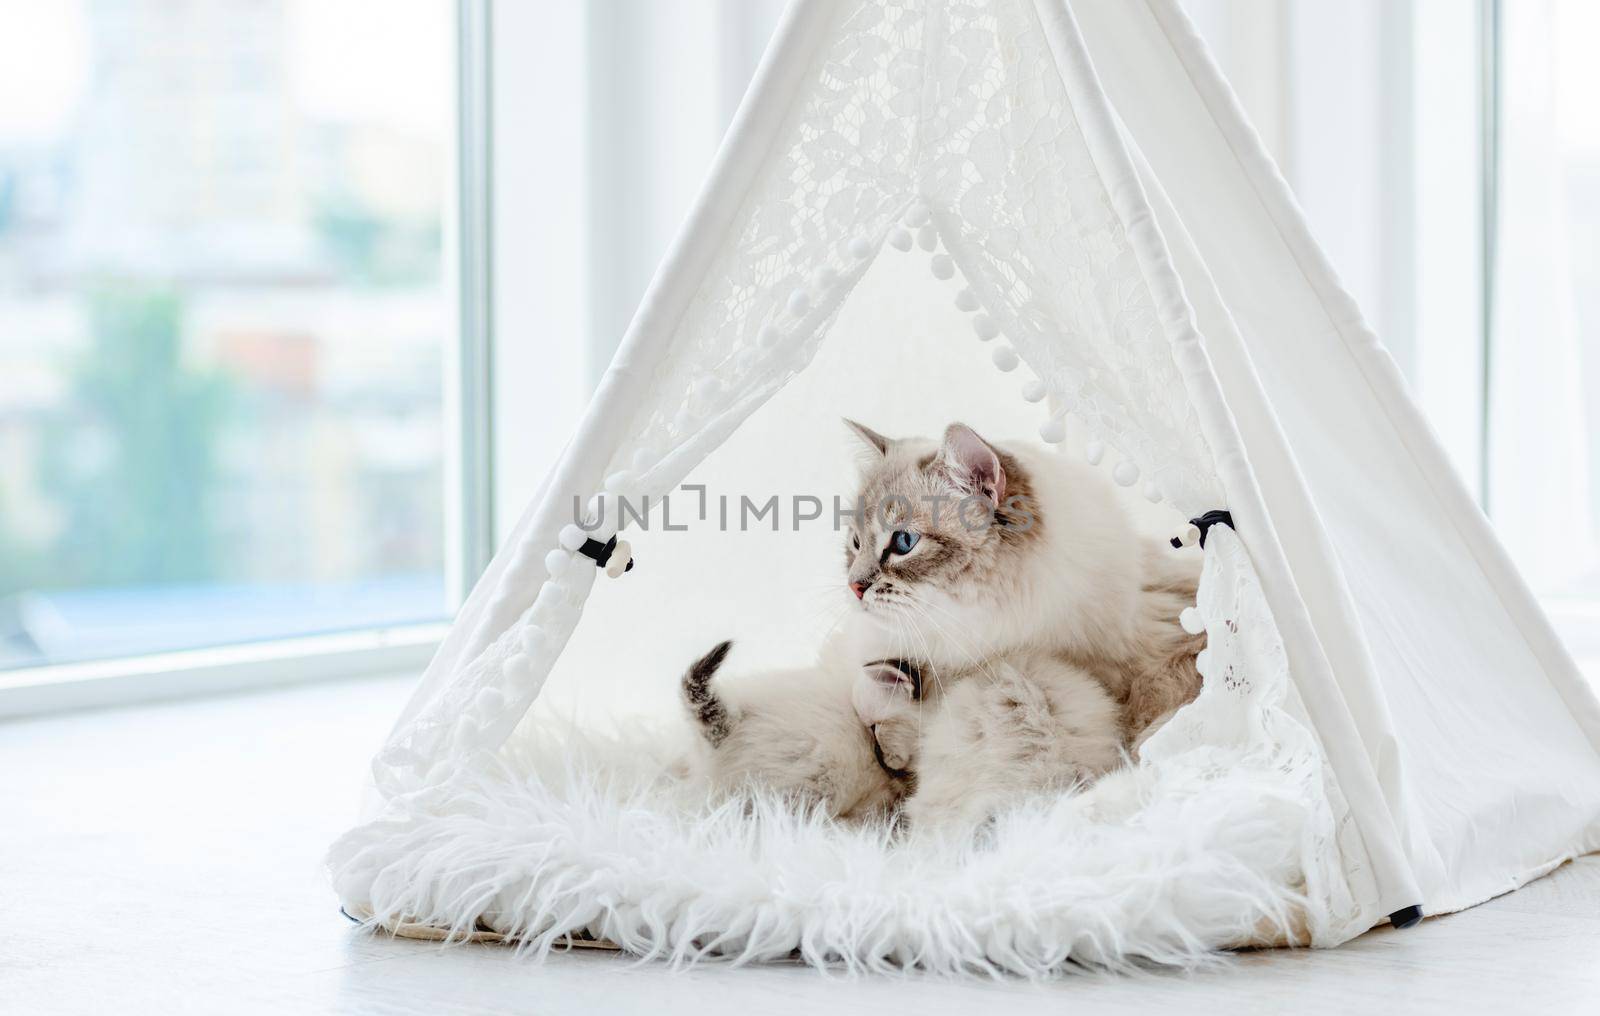 Cute ragdoll kittens sleeping close to their cat mother inside white curtain tent on fur. Adorable purebred feline family with kitty cats during studio photoshoot